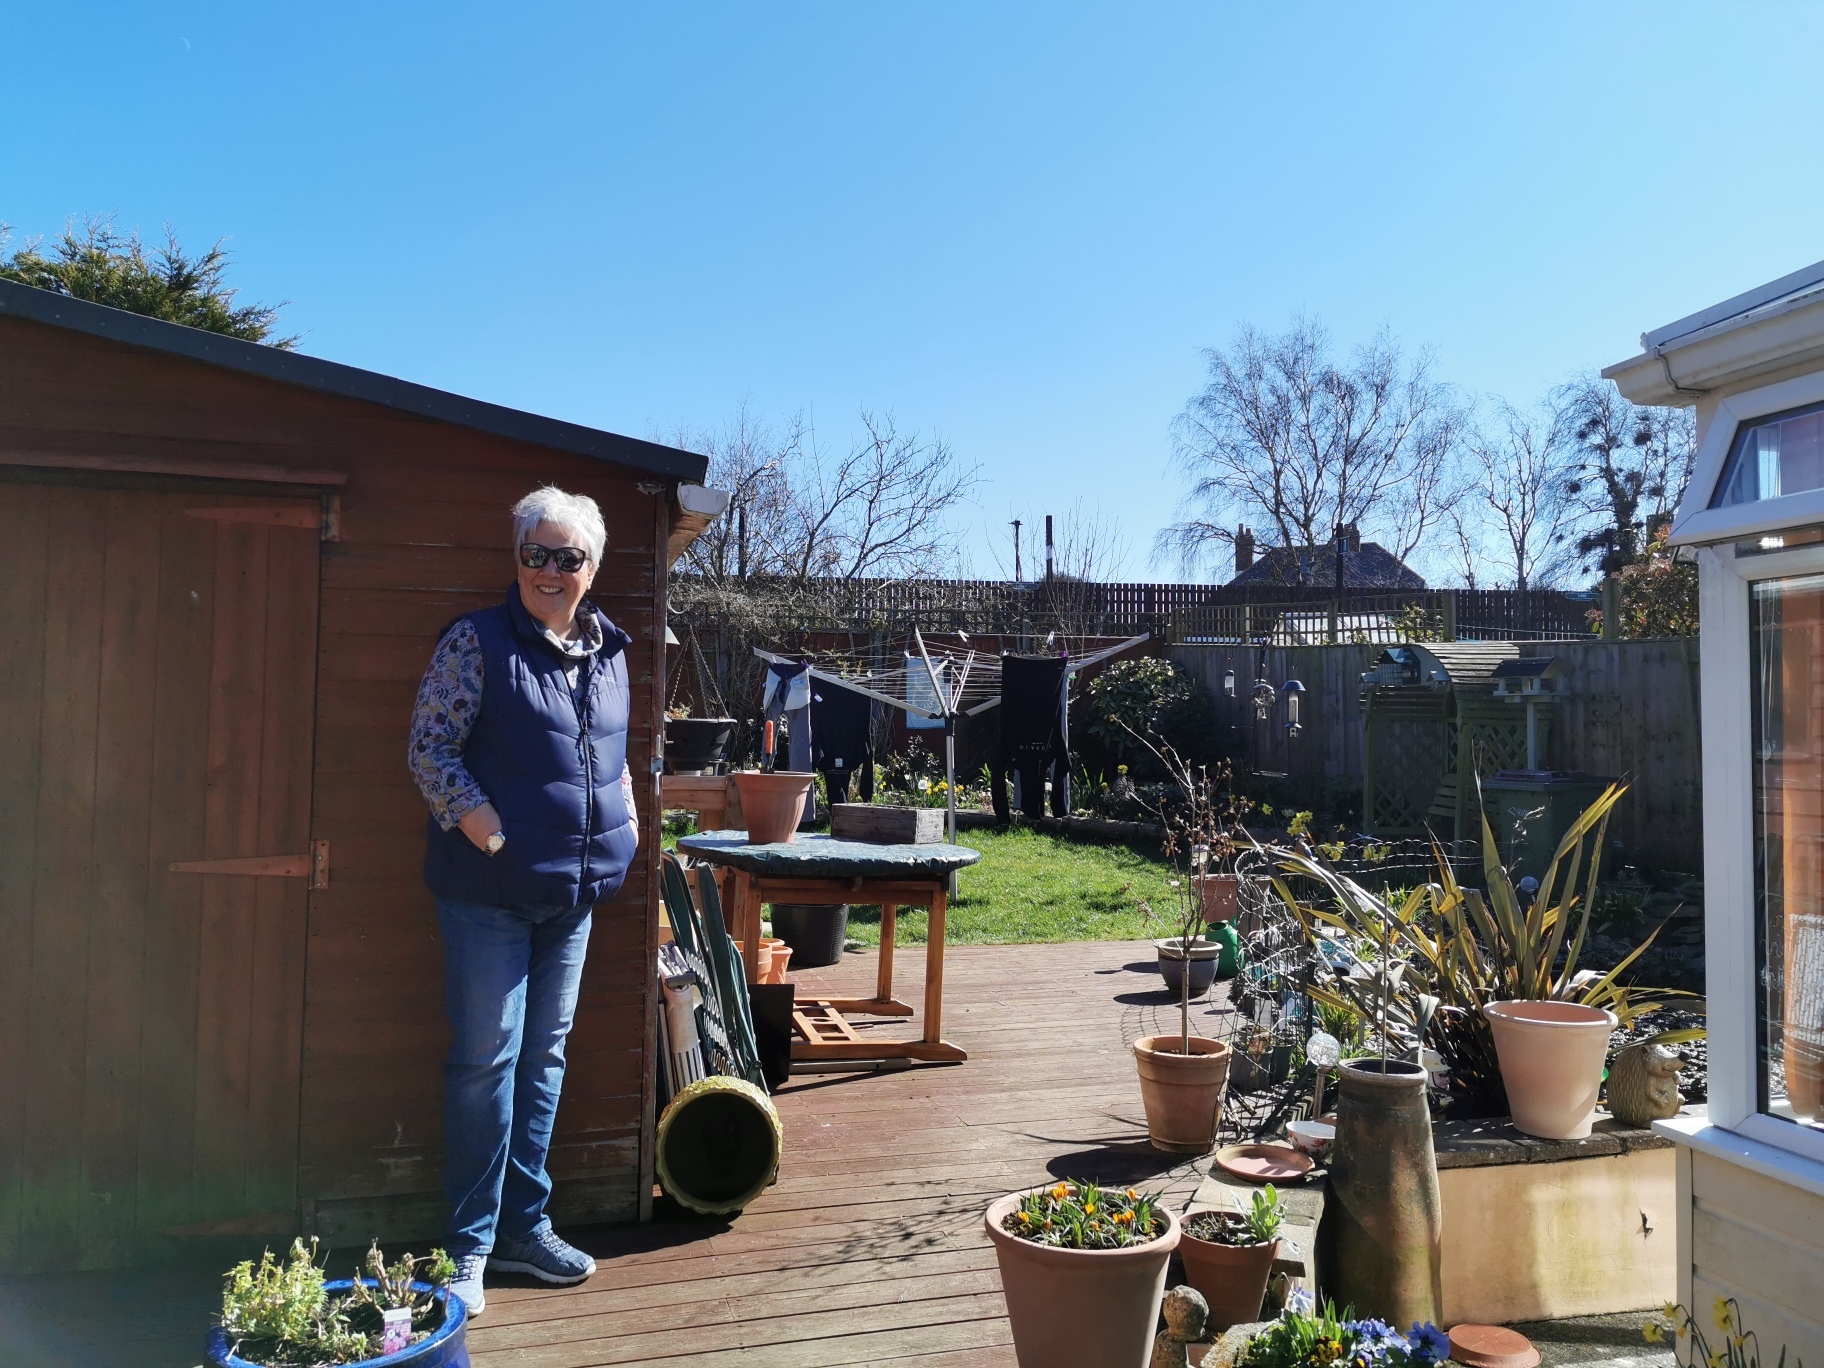 Diane Holbrook in her garden. People standing on the platform can see right into her garden and home.